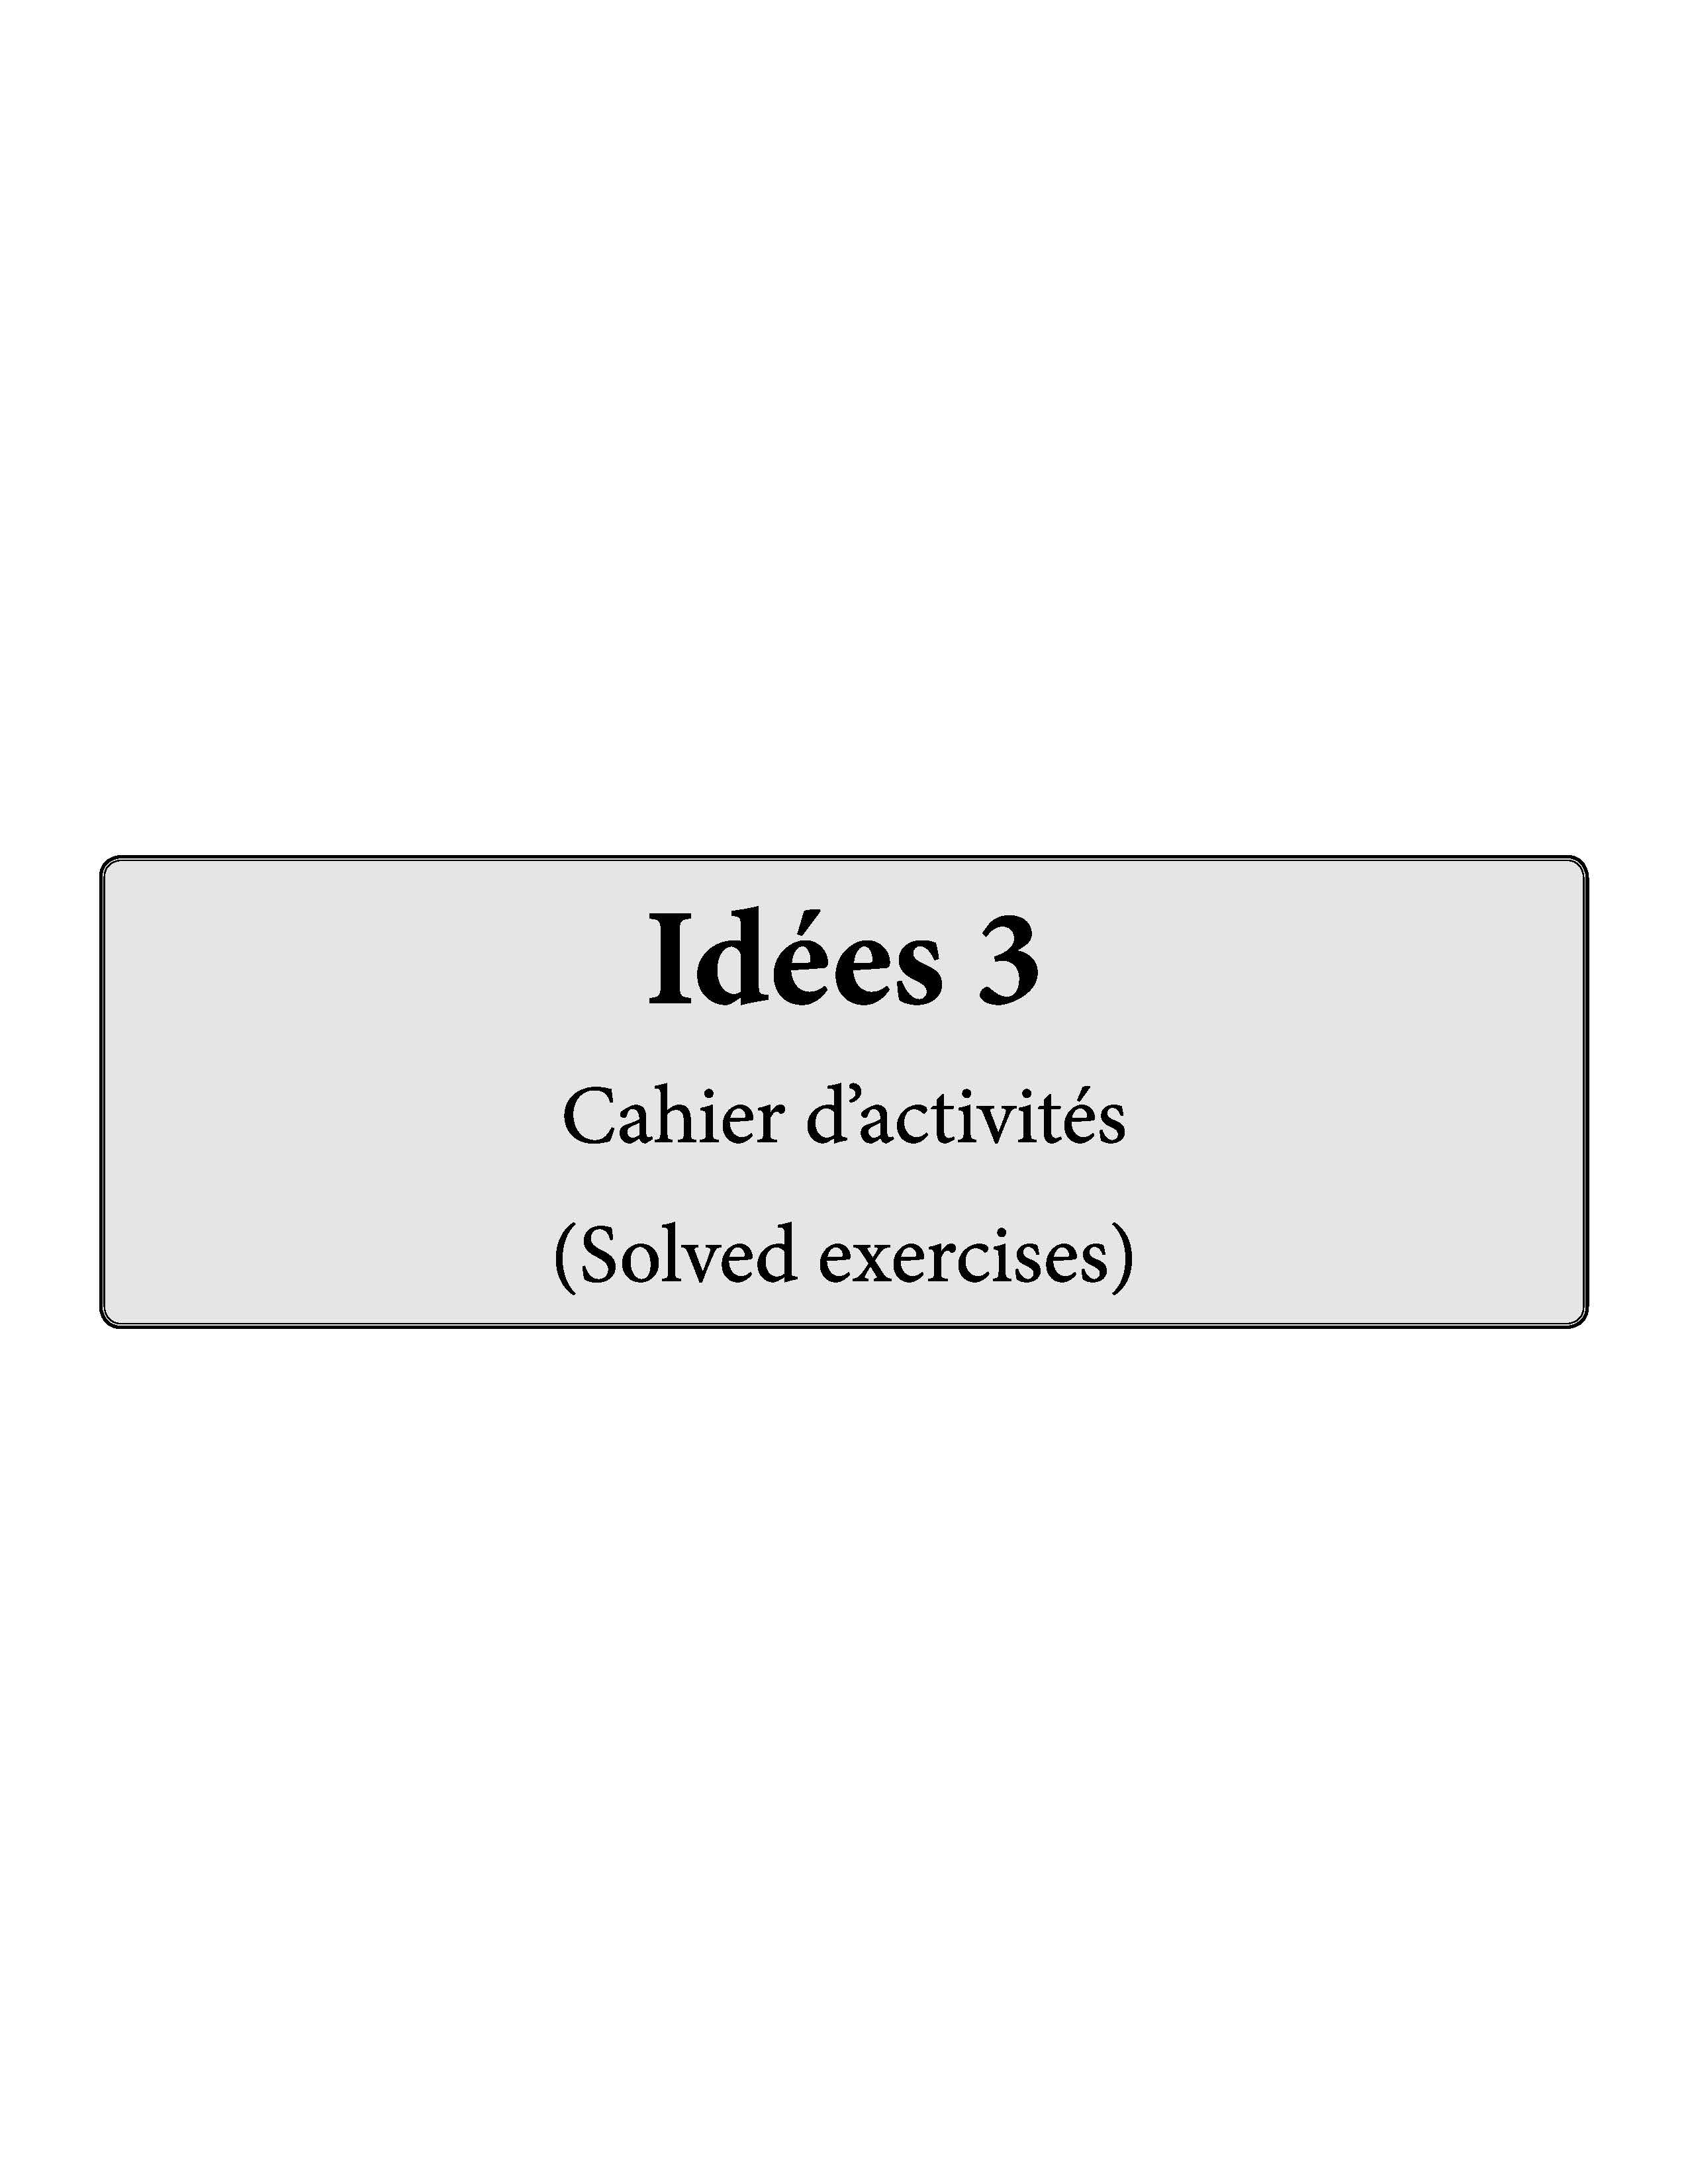 Idées Complete Study Material 3 (For Class 8) Solved Exercises